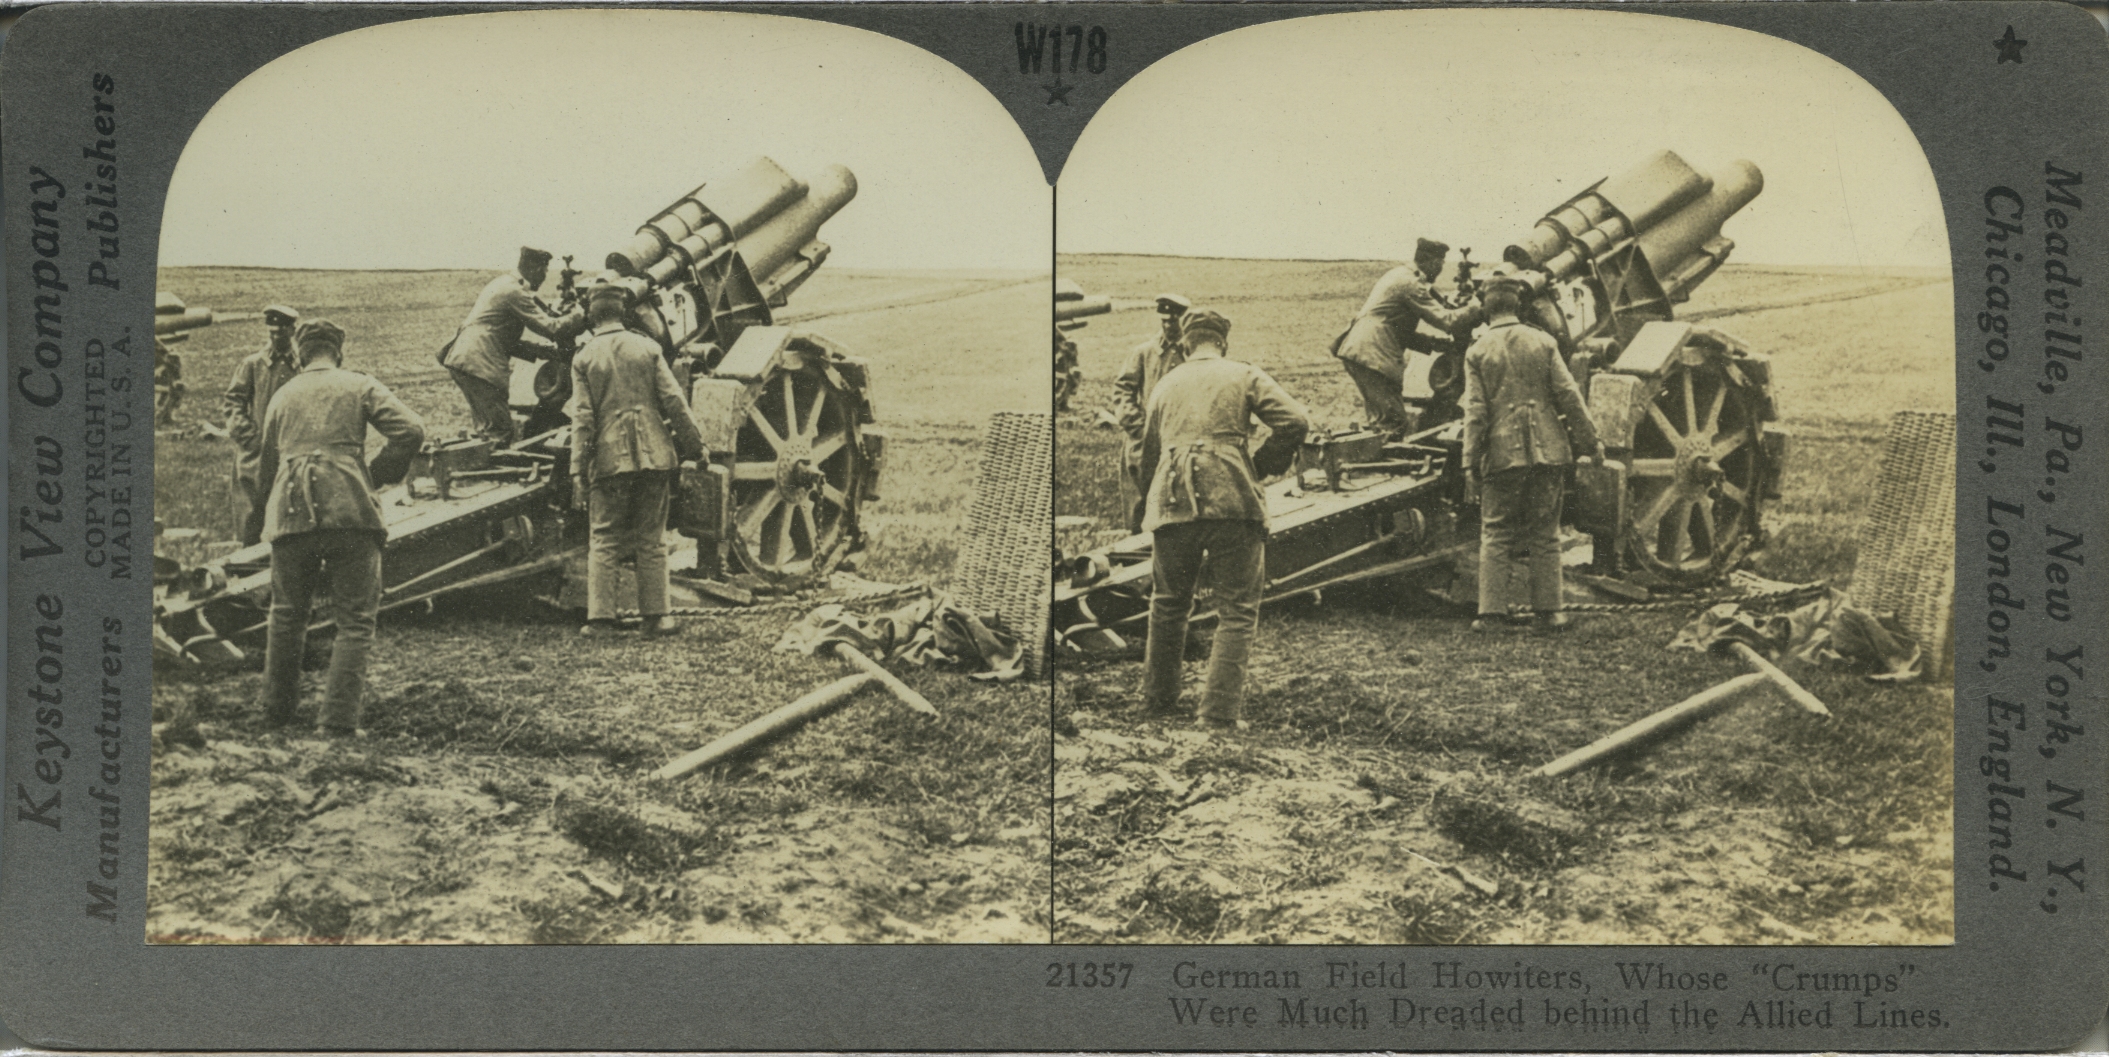 German Field Howitzers, Whose "Crumps" Were Much Dreaded behind the Allied Lines